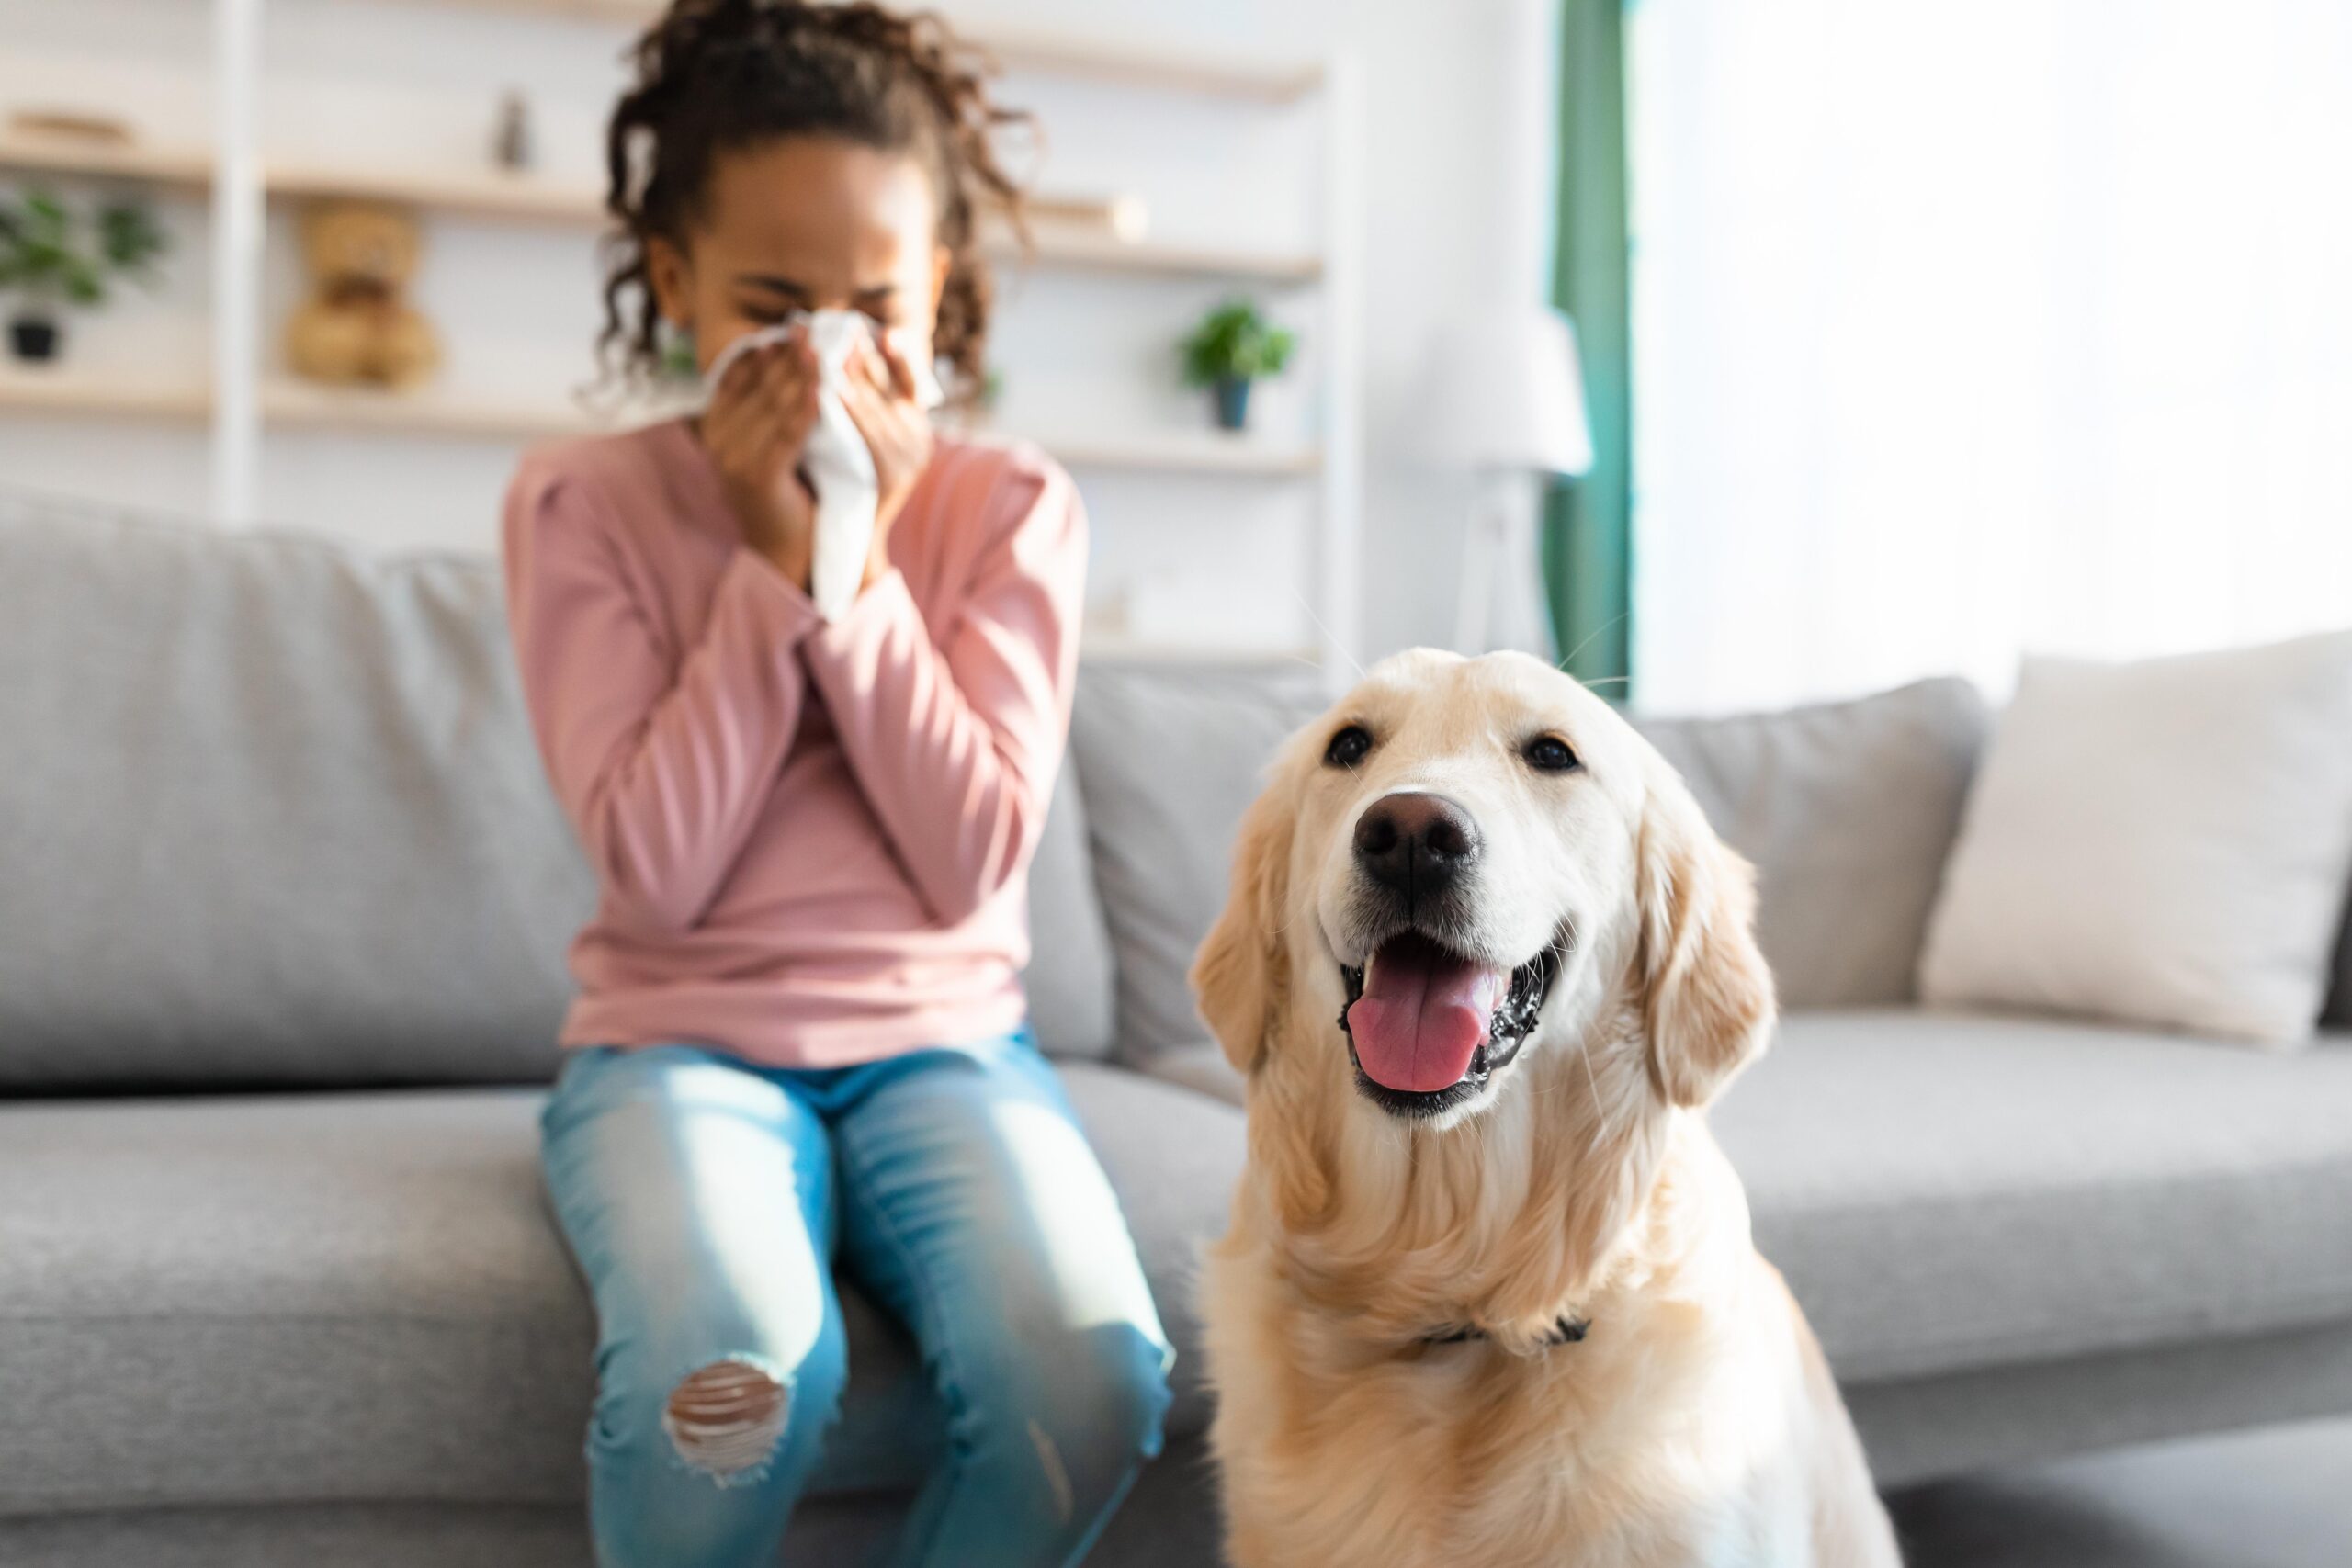 Girl on couch sneezing into a tissue with a smiling golden retriever dog in the foreground.